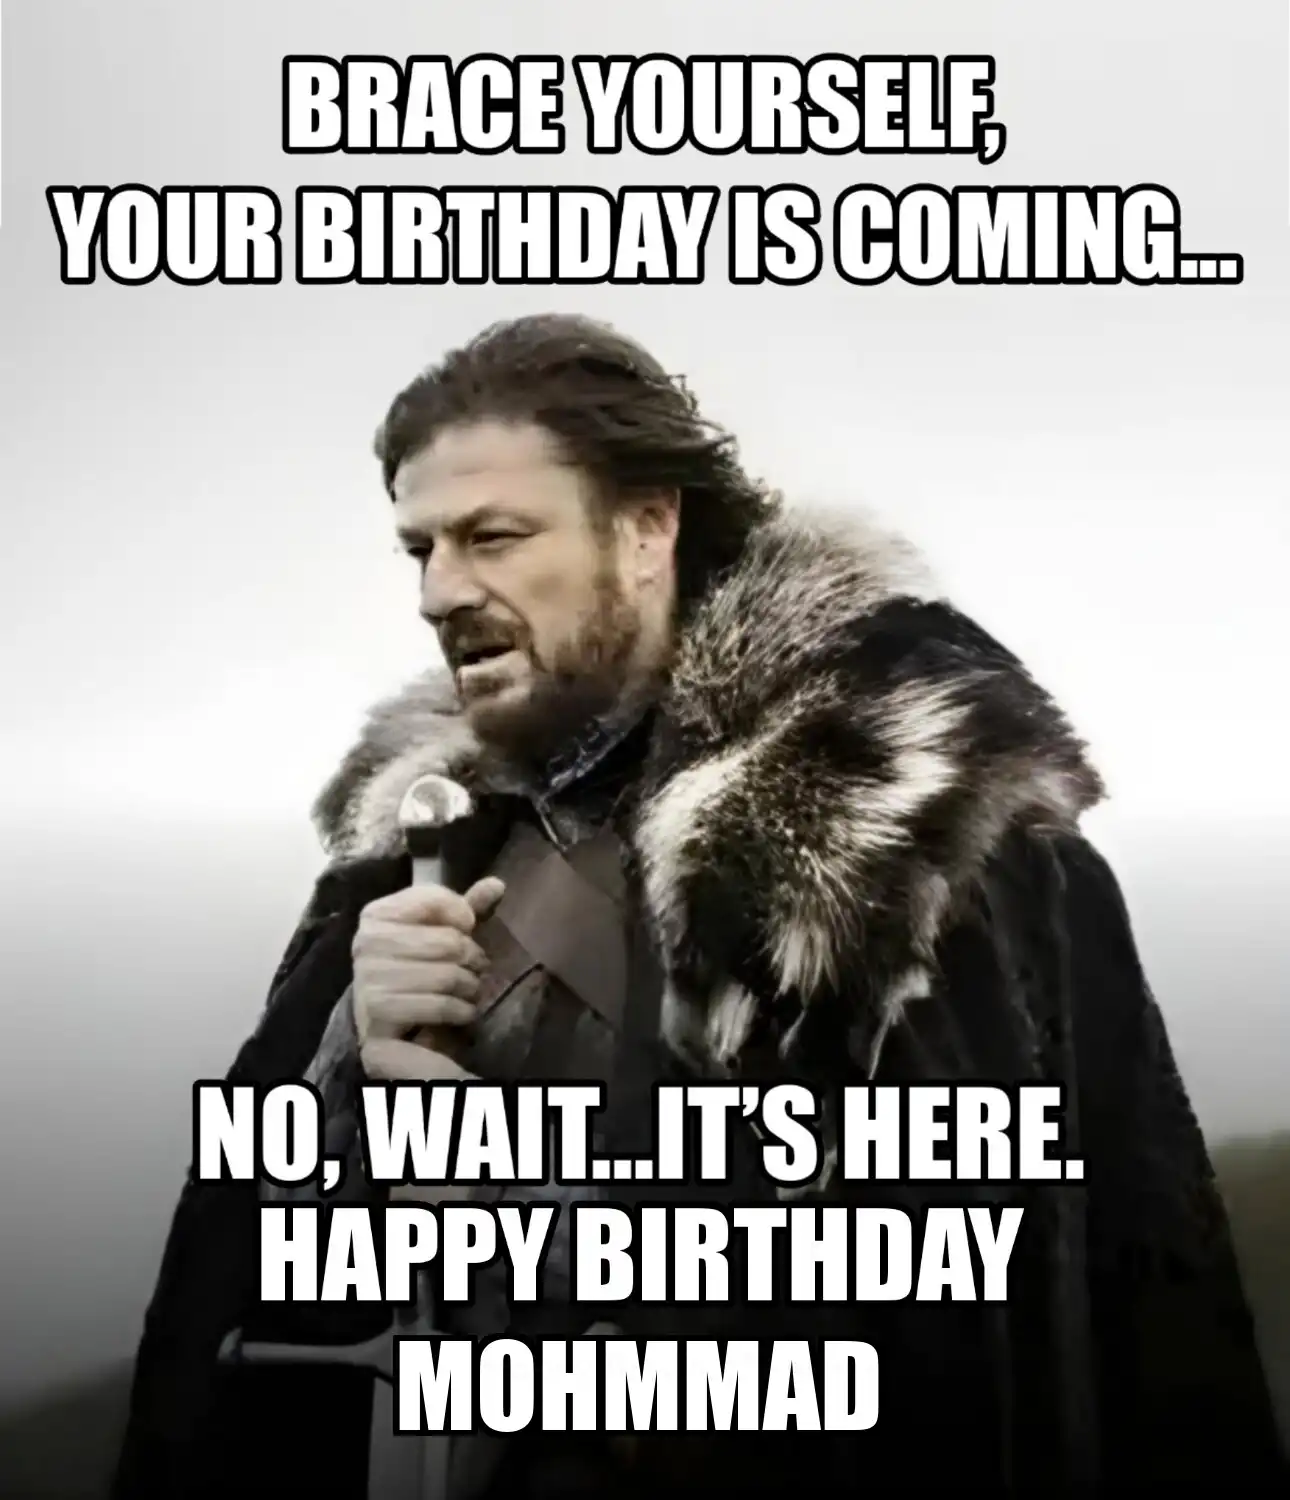 Happy Birthday Mohmmad Brace Yourself Your Birthday Is Coming Meme